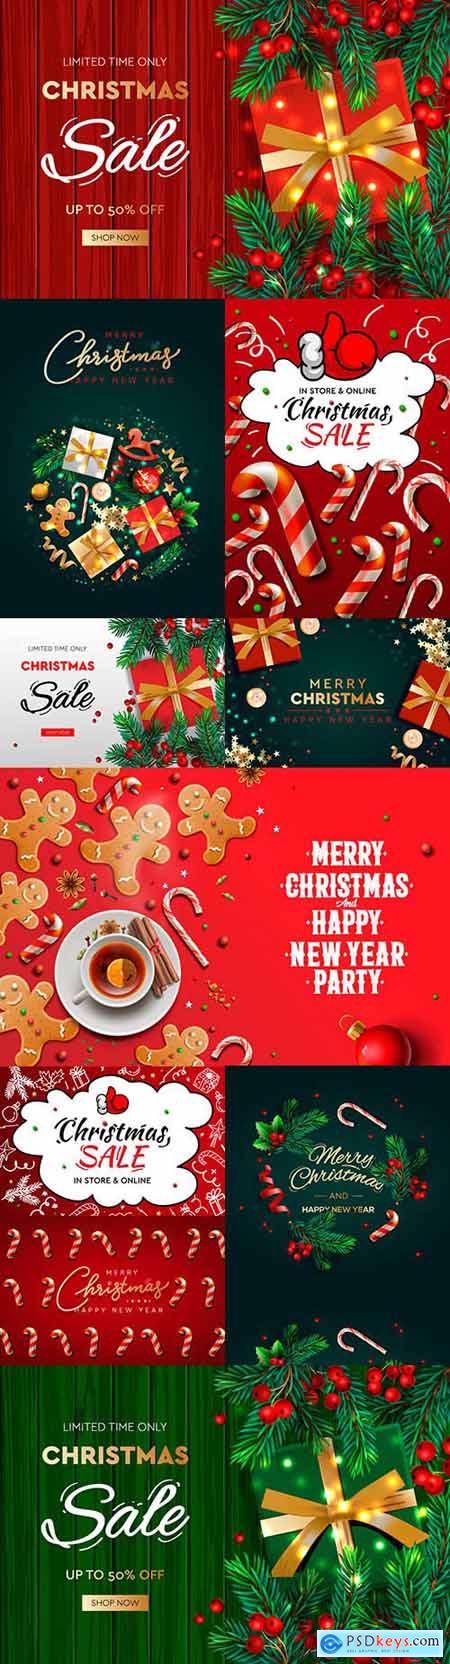 Christmas and New Year design festive realistic background 2